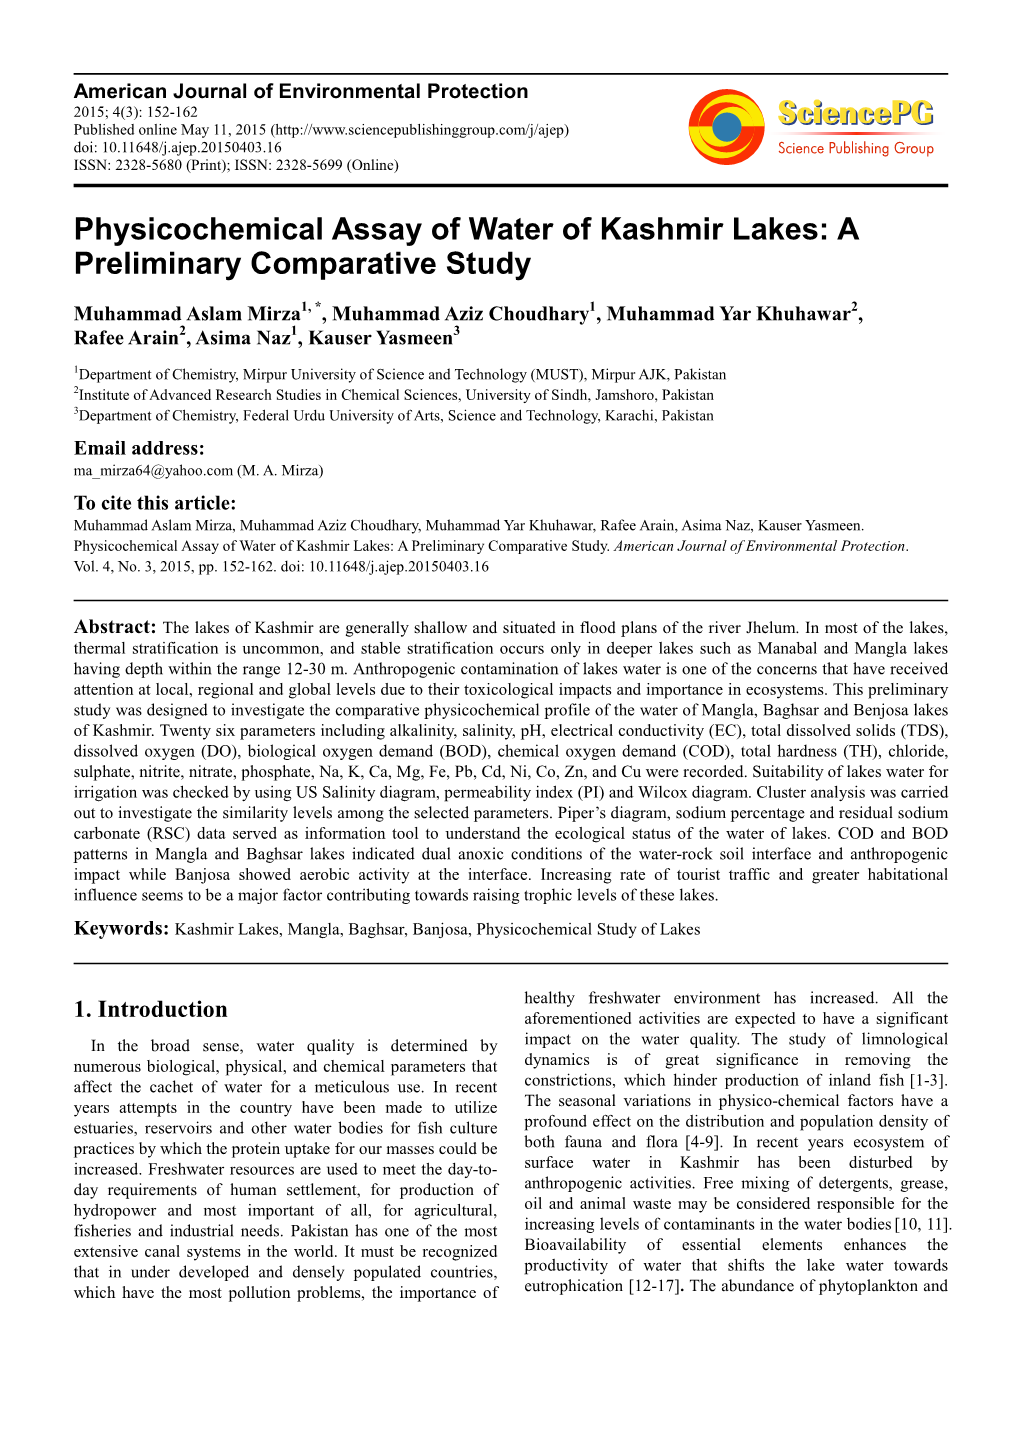 Physicochemical Assay of Water of Kashmir Lakes: a Preliminary Comparative Study